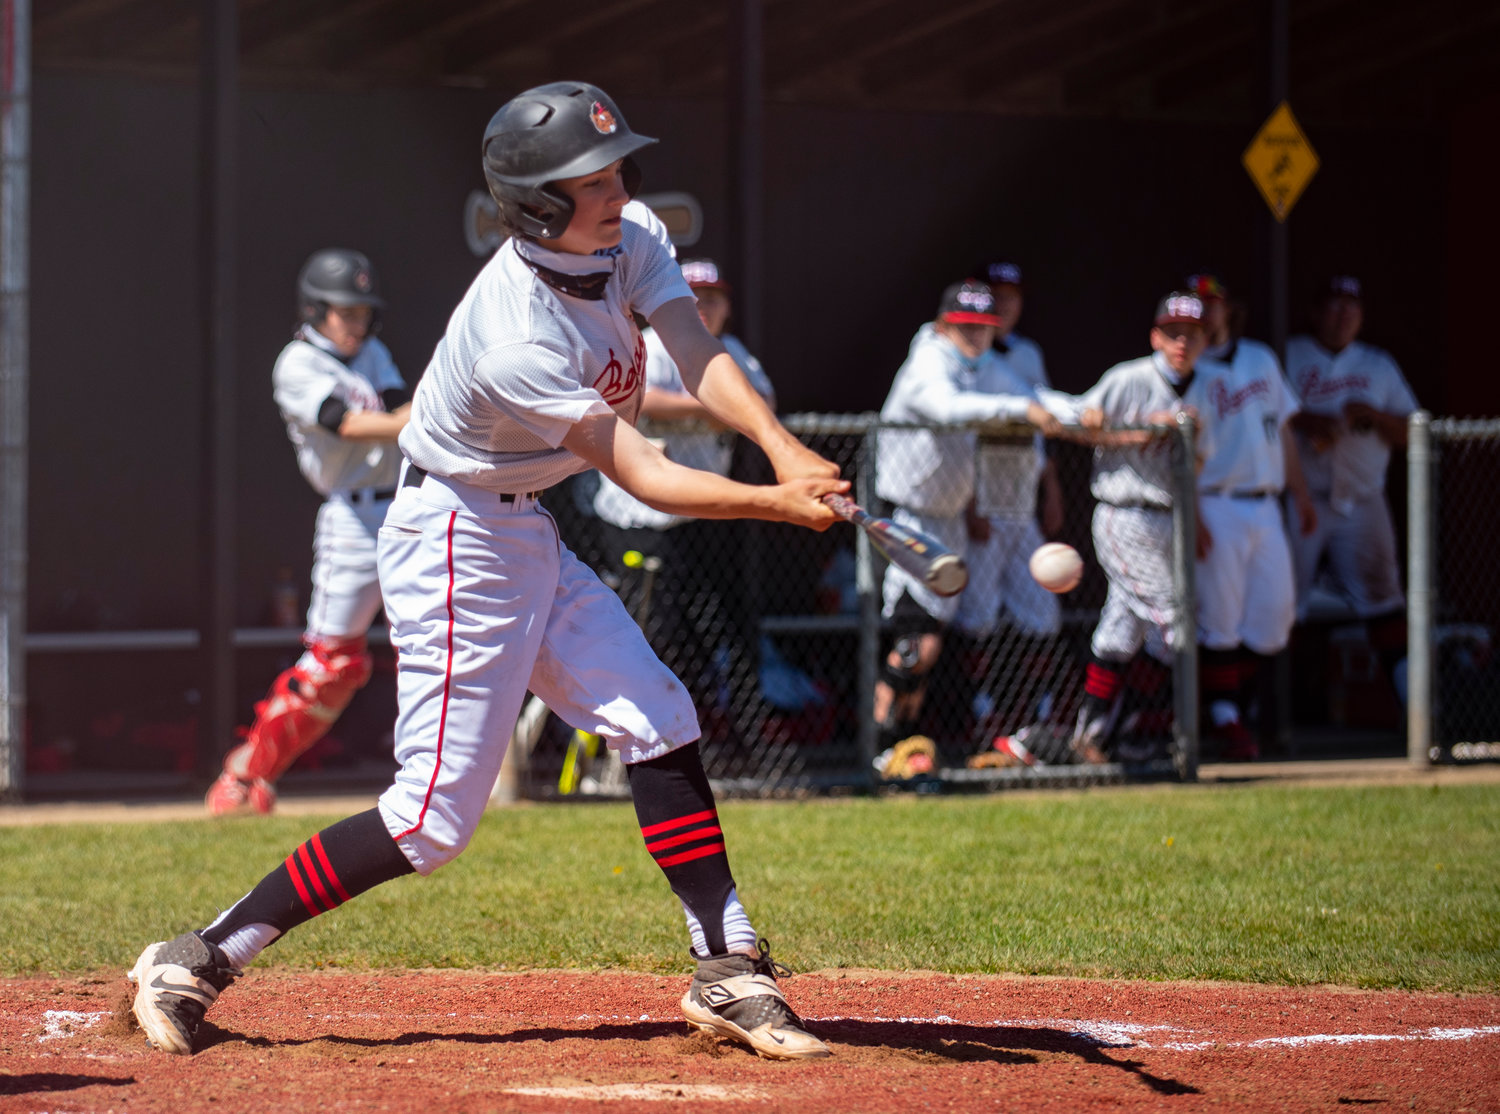 Tenino's Brody Noonan lines a Hoquiam pitch up on Saturday.